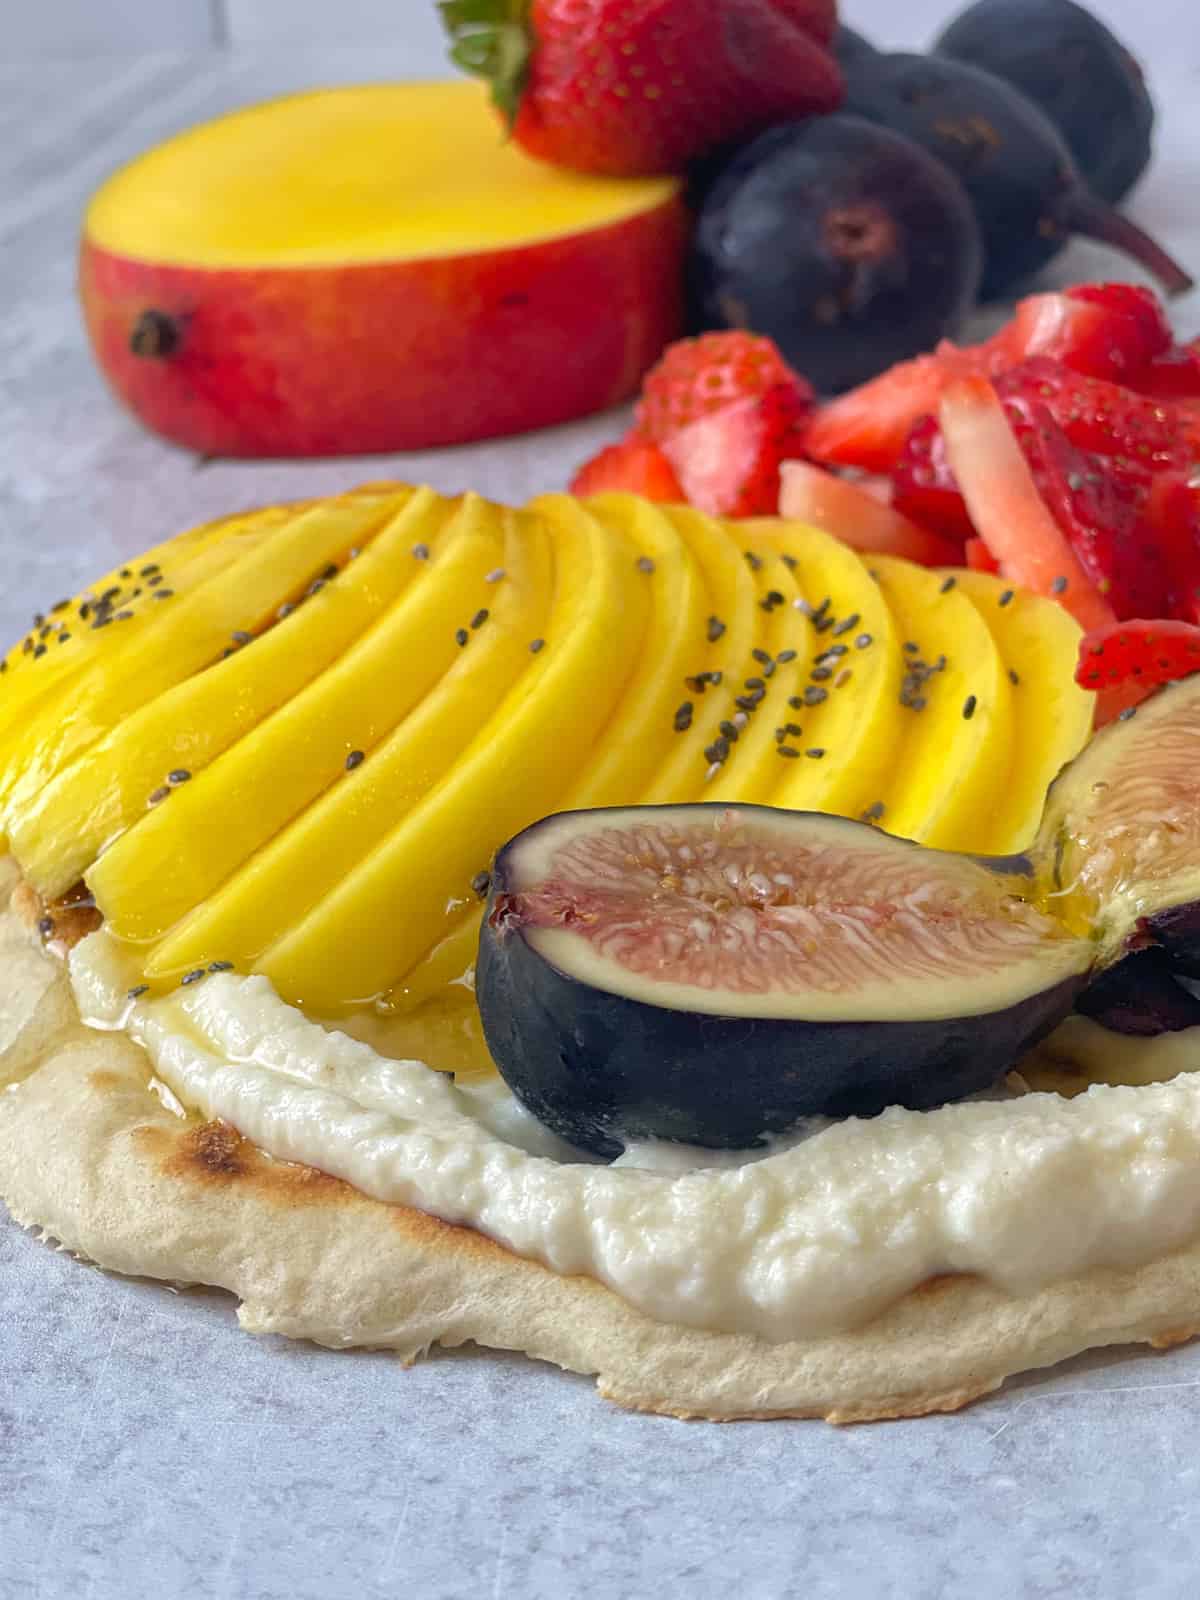 A delightful flatbread adorned with creamy ricotta cheese and a colorful assortment of fresh fruits, offering a perfect balance of sweetness and indulgence.